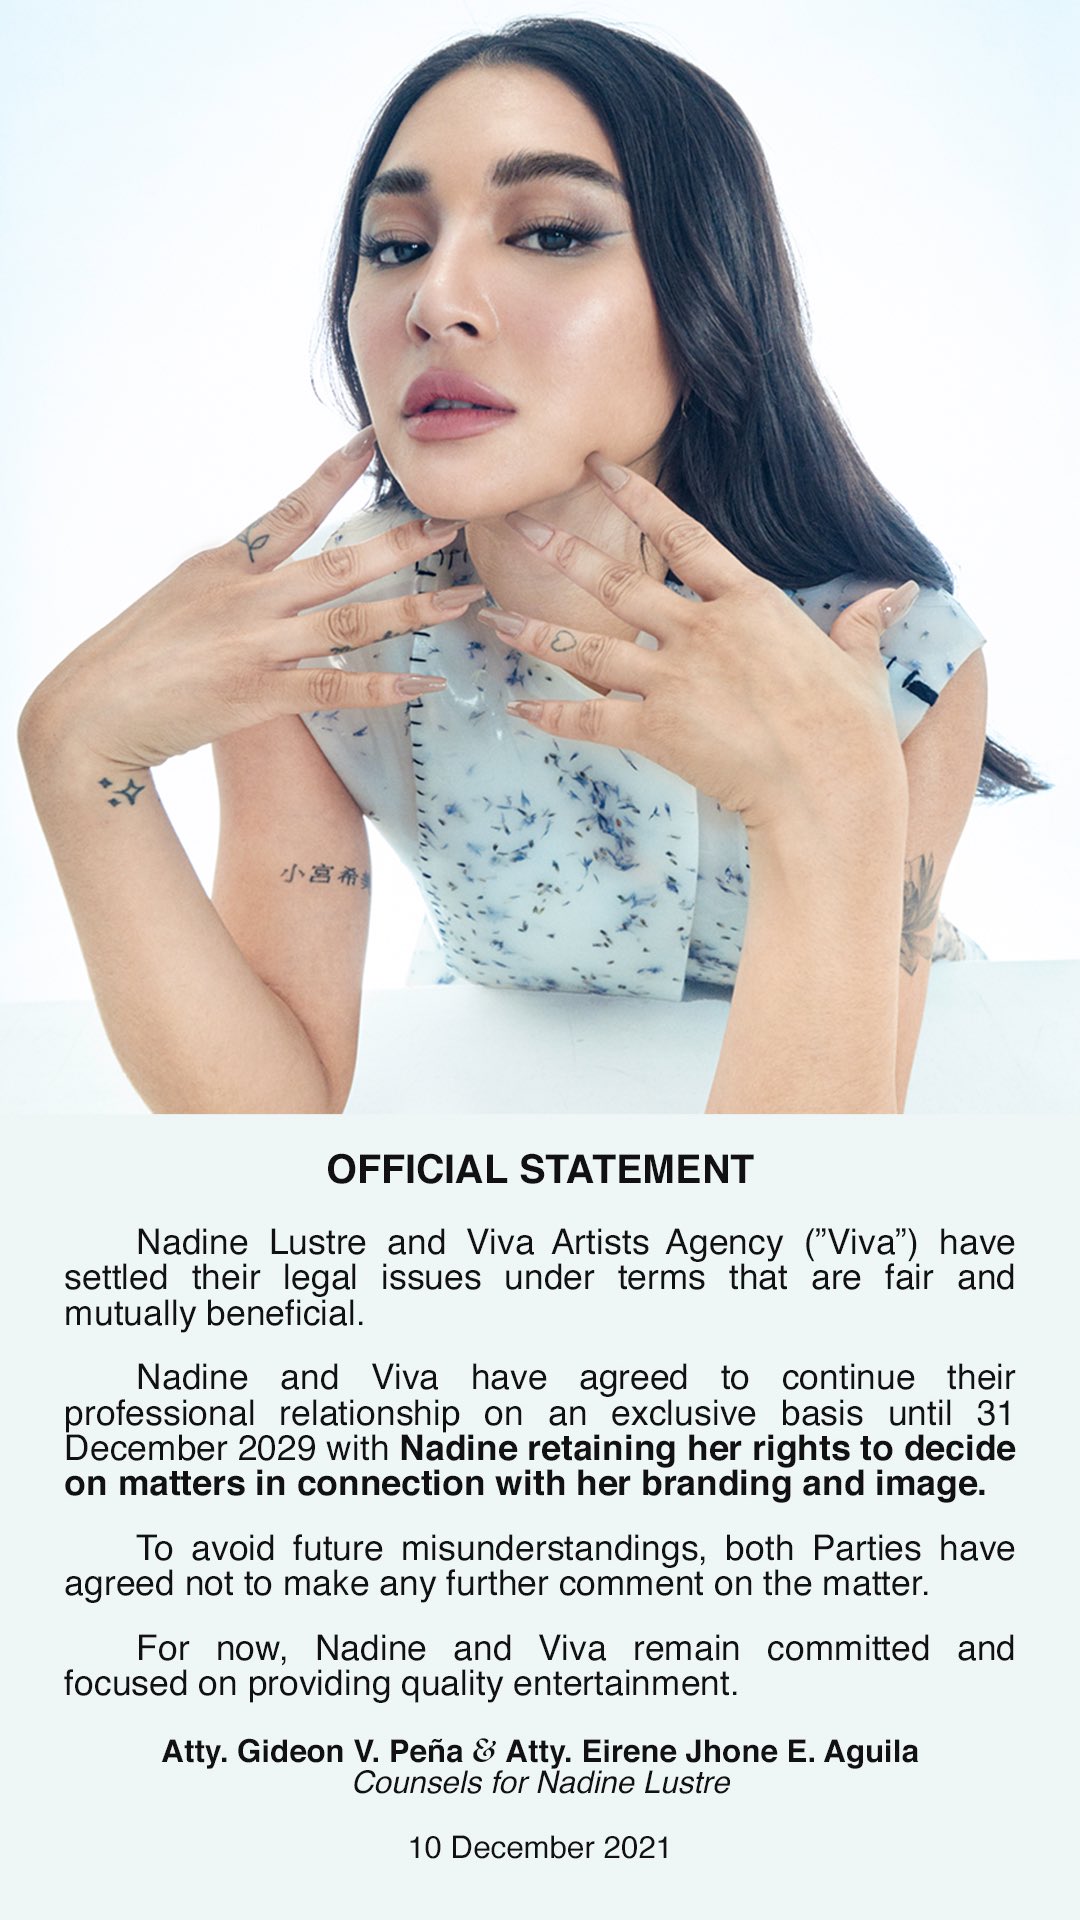 Nadine's legal counsels shared her official statement.